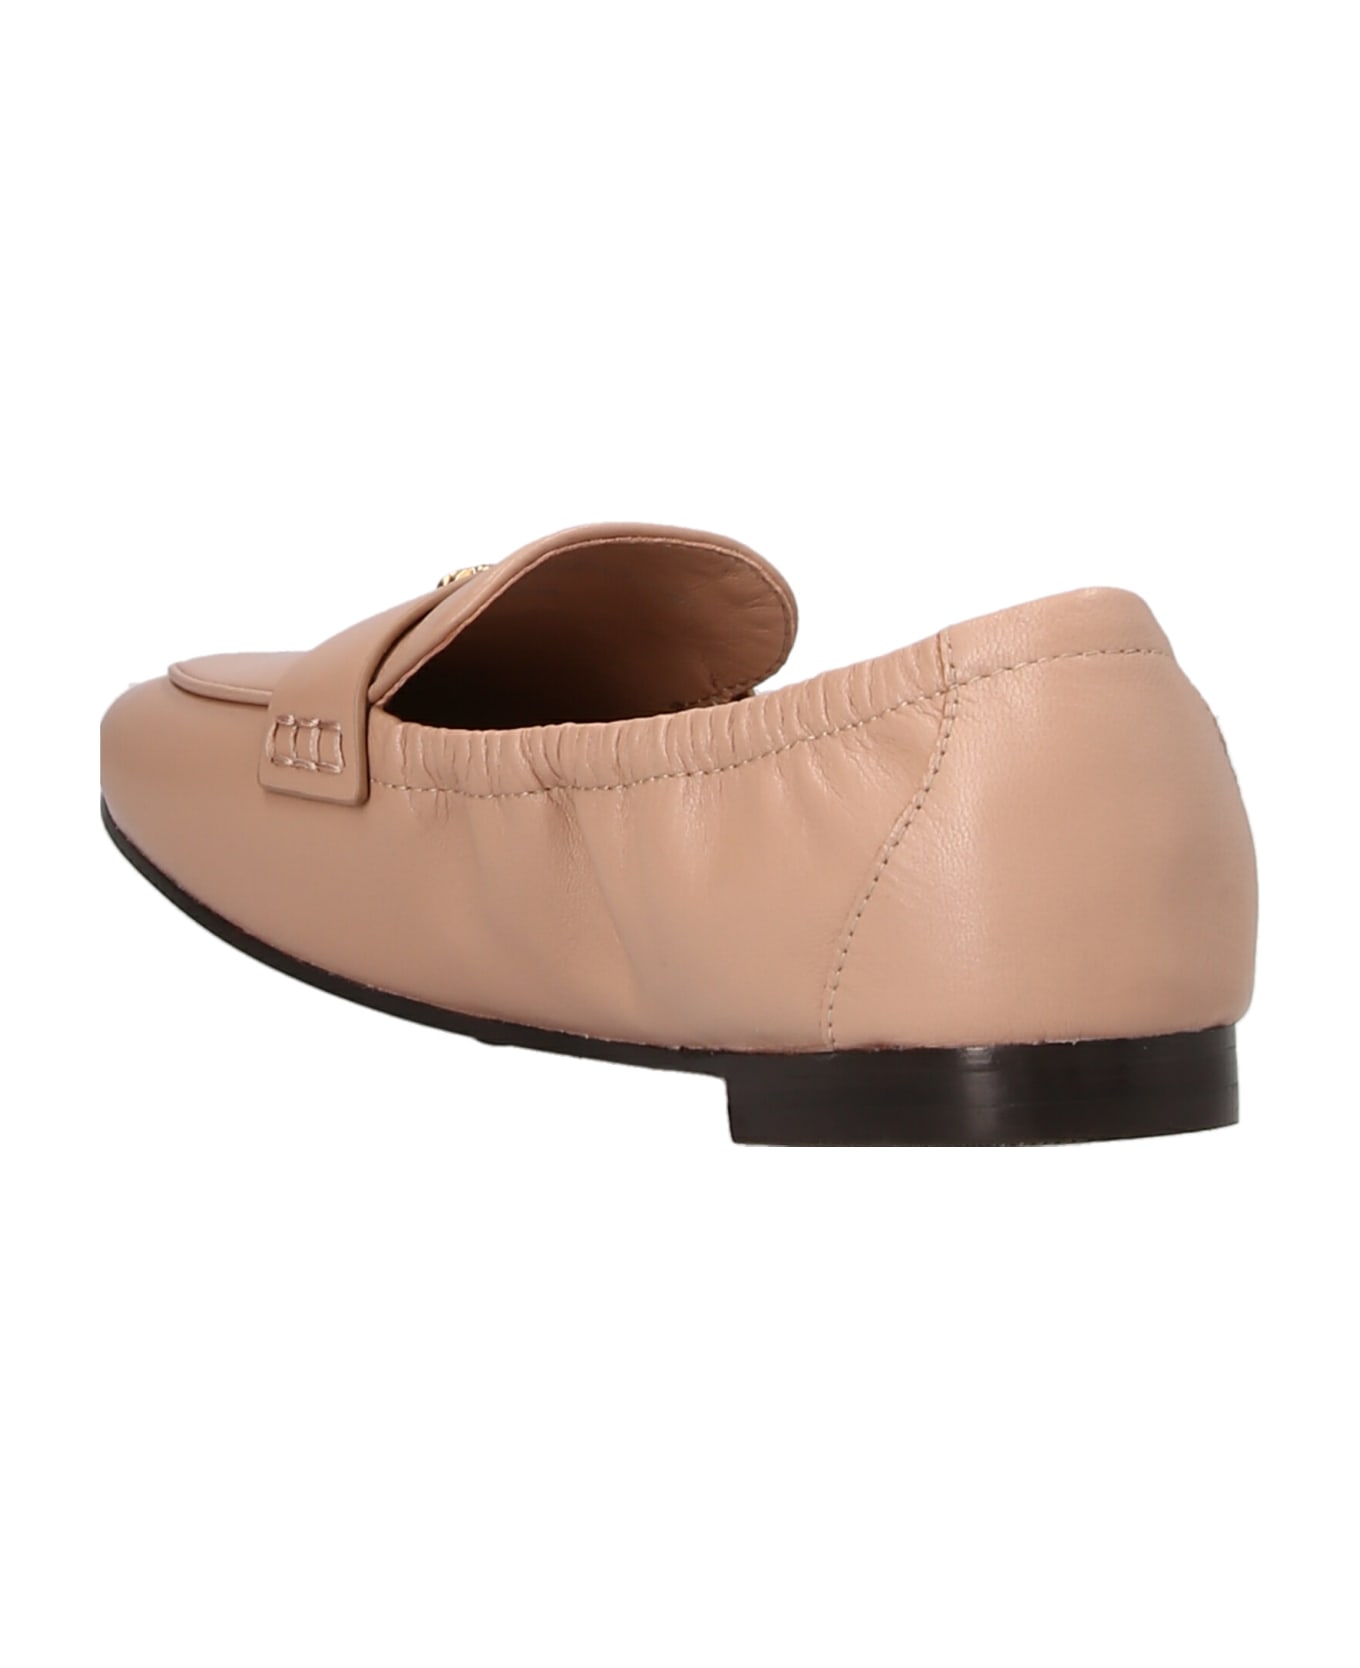 Tory Burch Ballet Leather Loafer - Pink Dune フラットシューズ